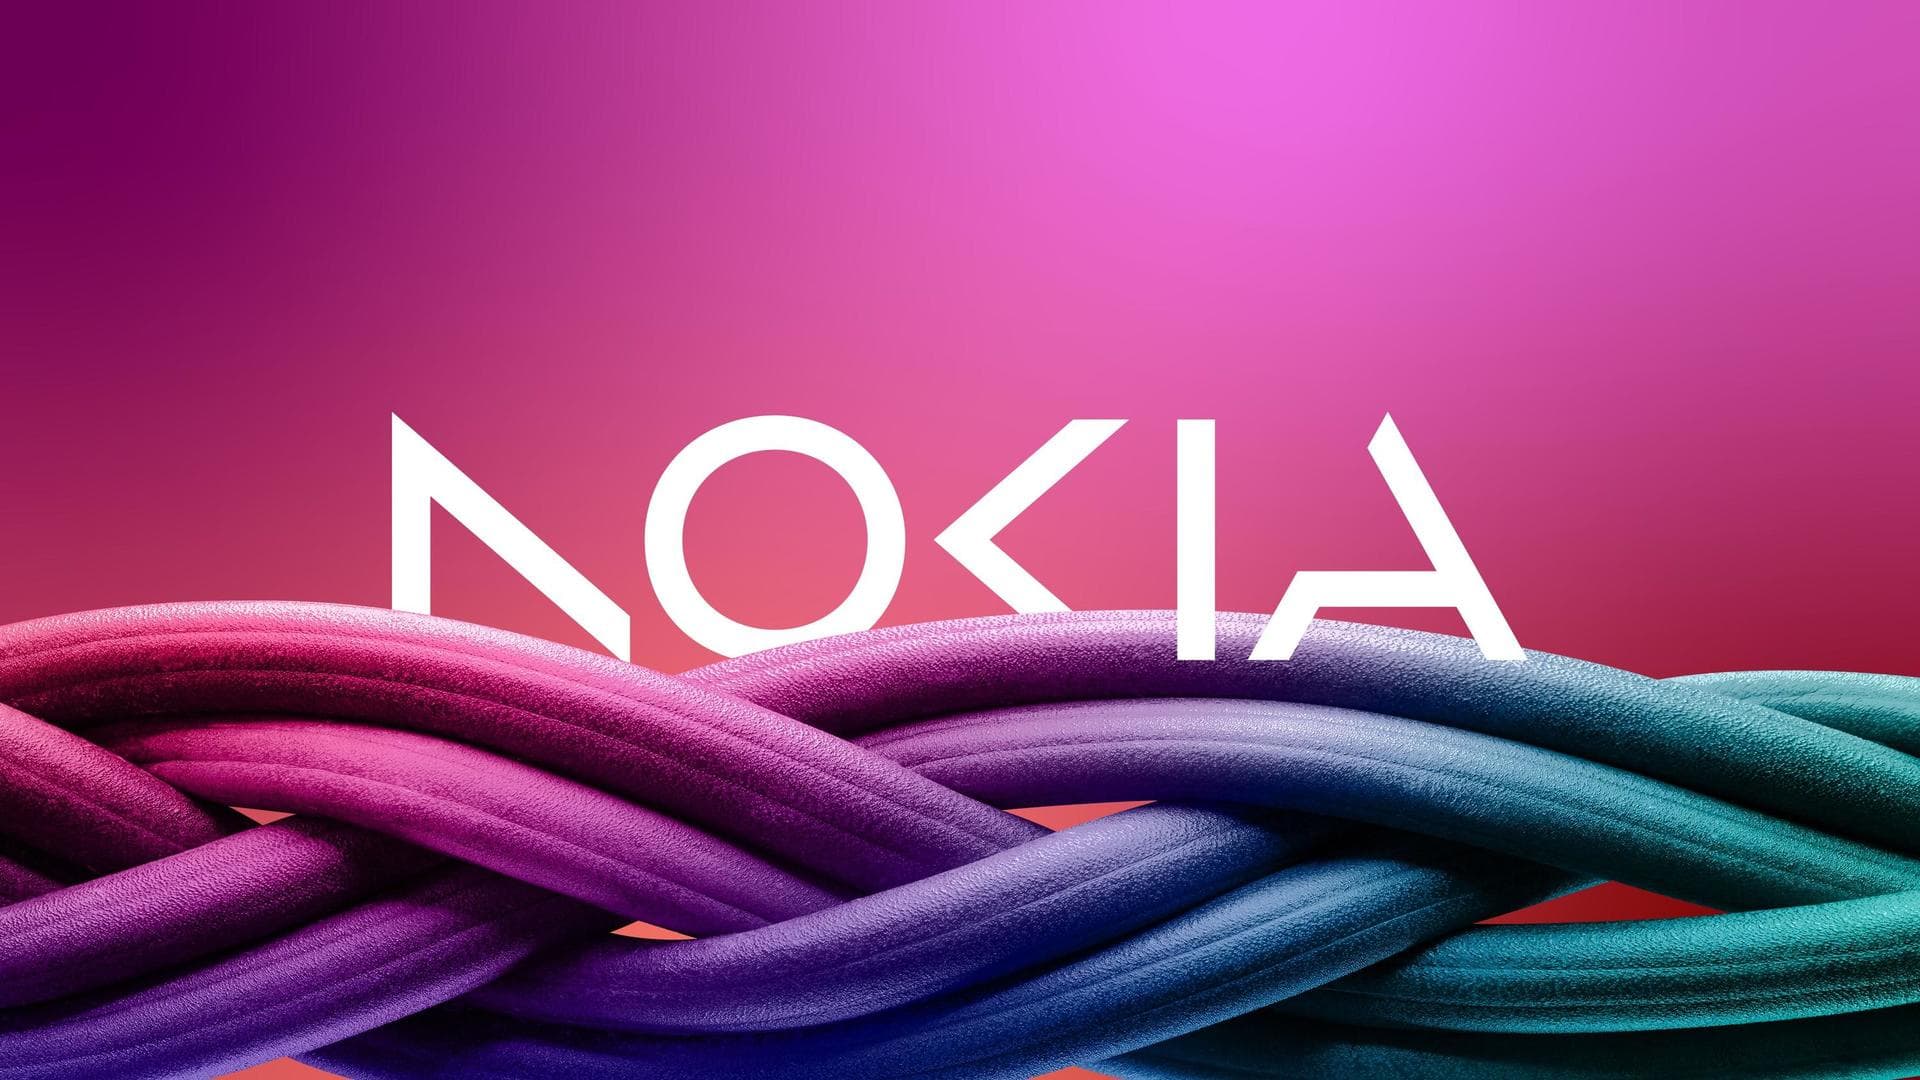 Nokia introduces Pure UI for B2B and enterprise products